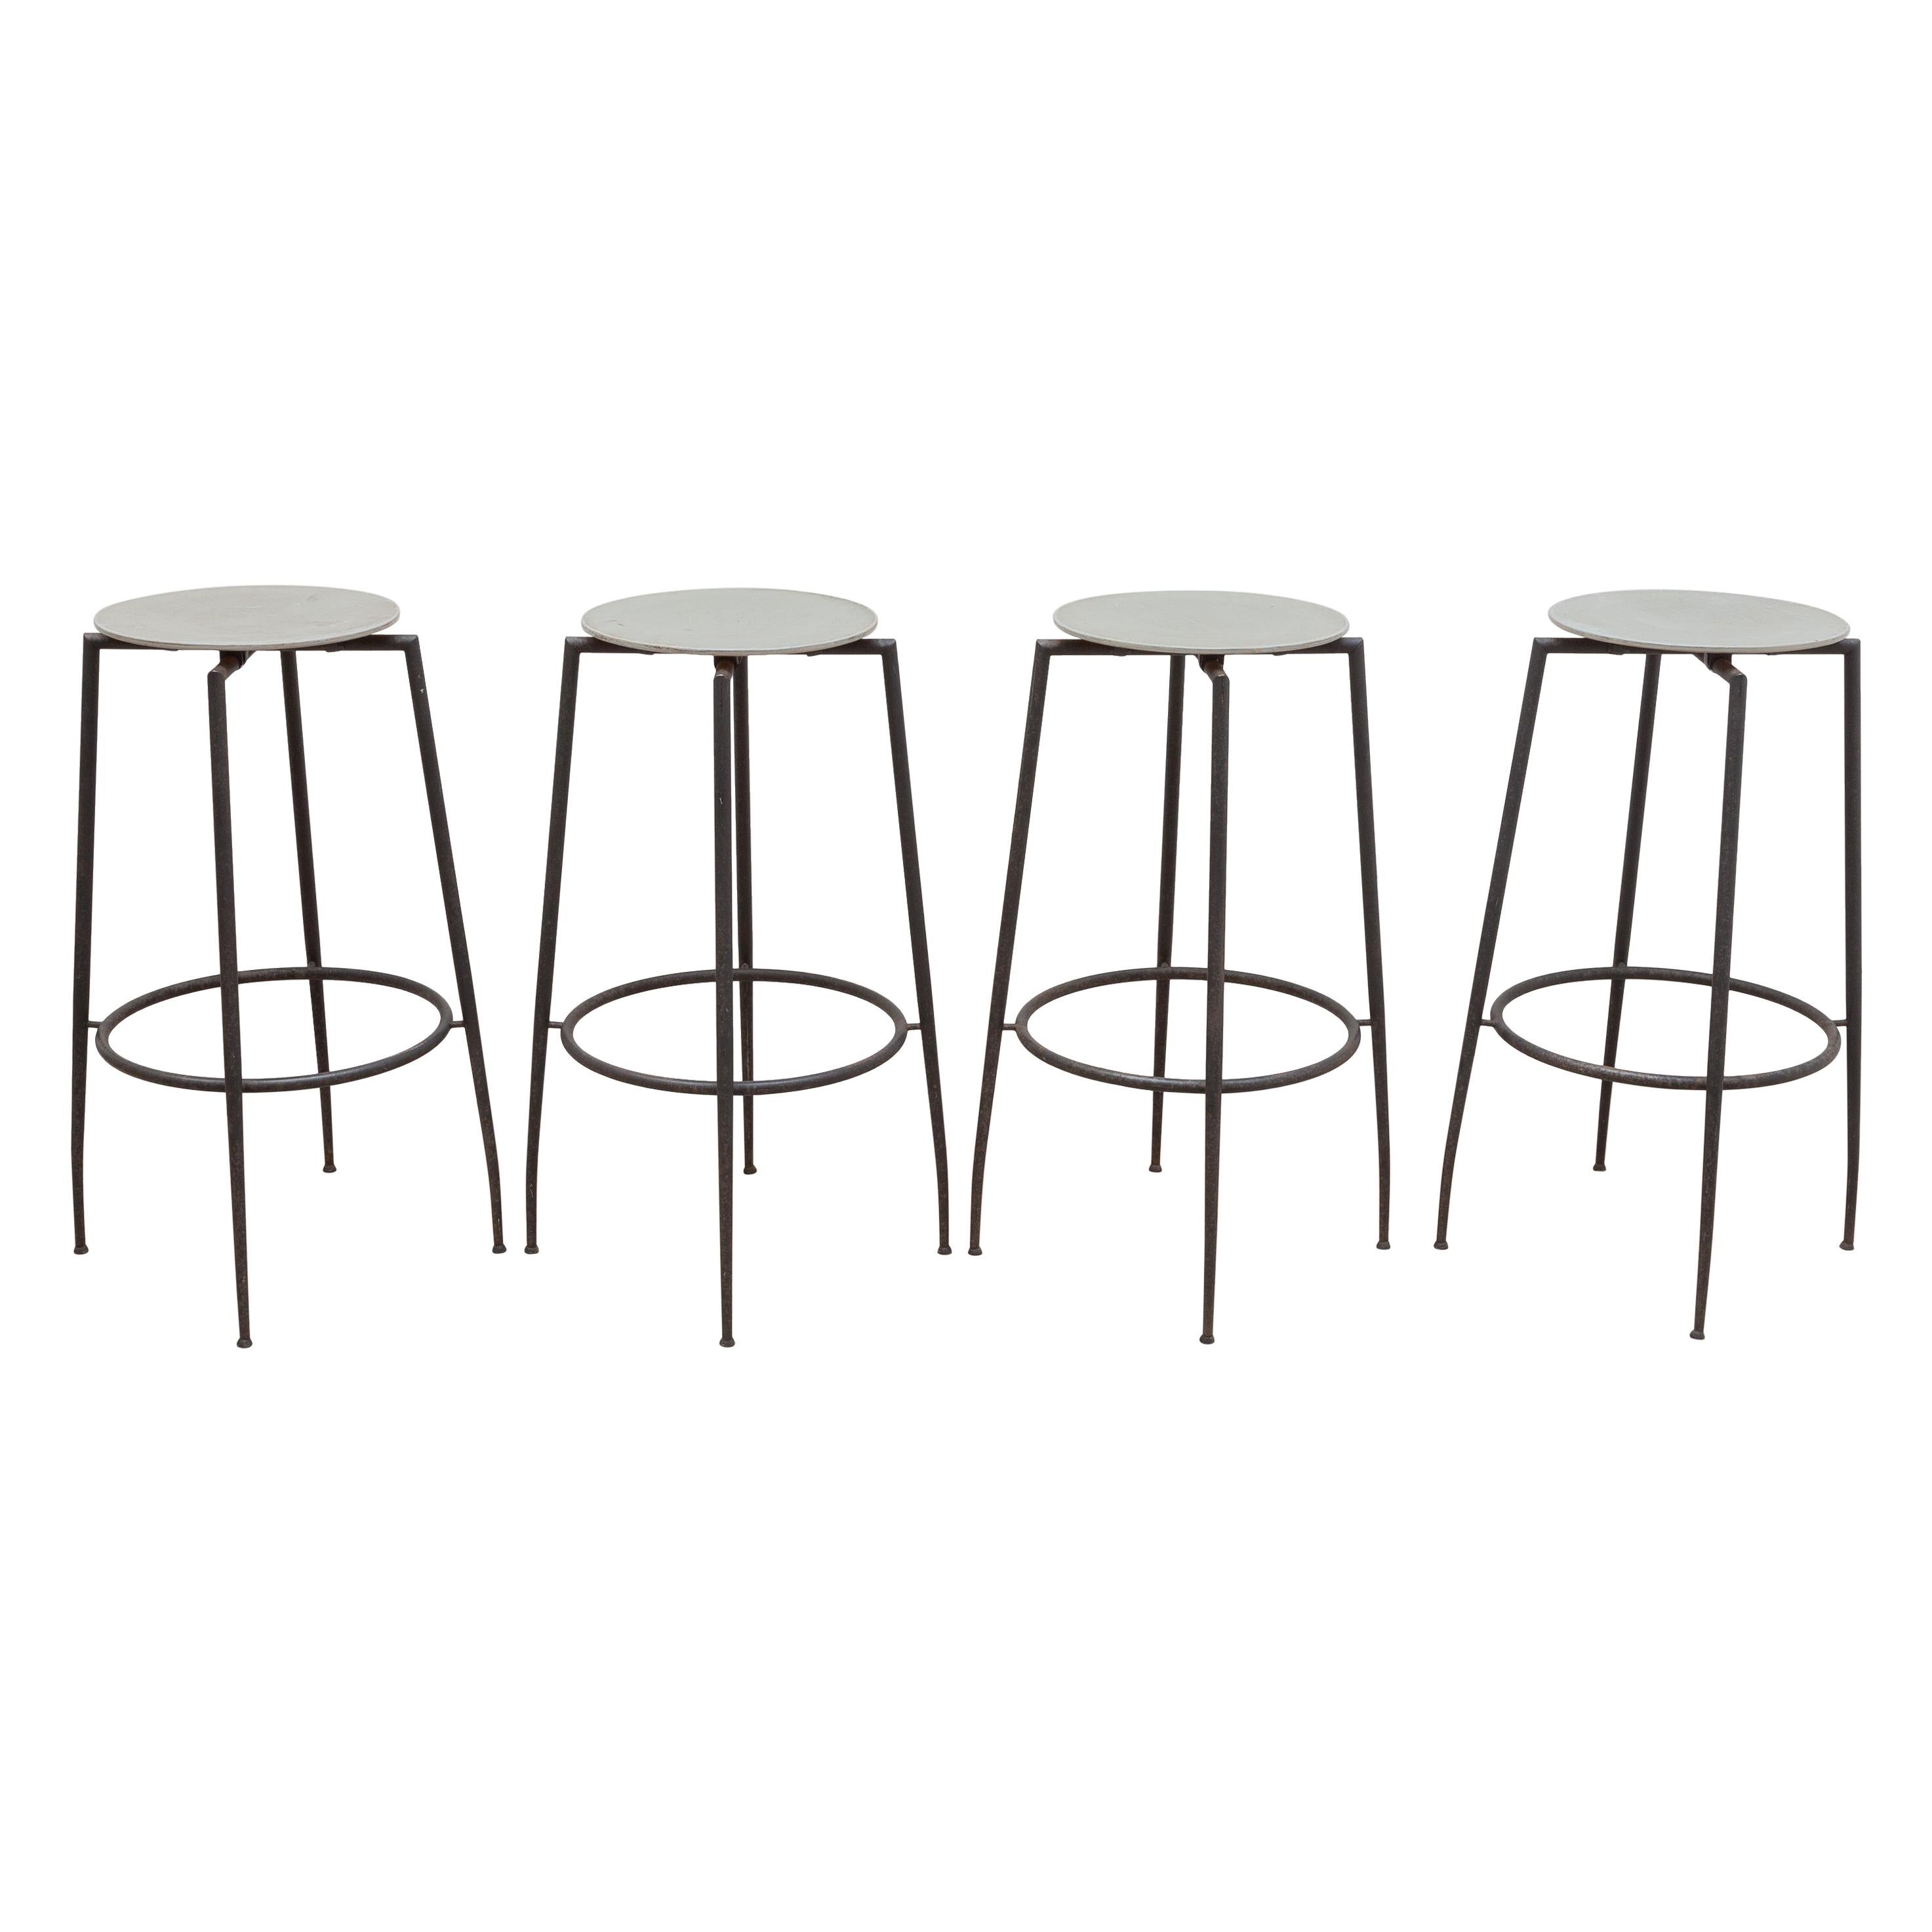 Wrought Iron Industrial Foot Stools Designed by Foraform, Norway For Sale